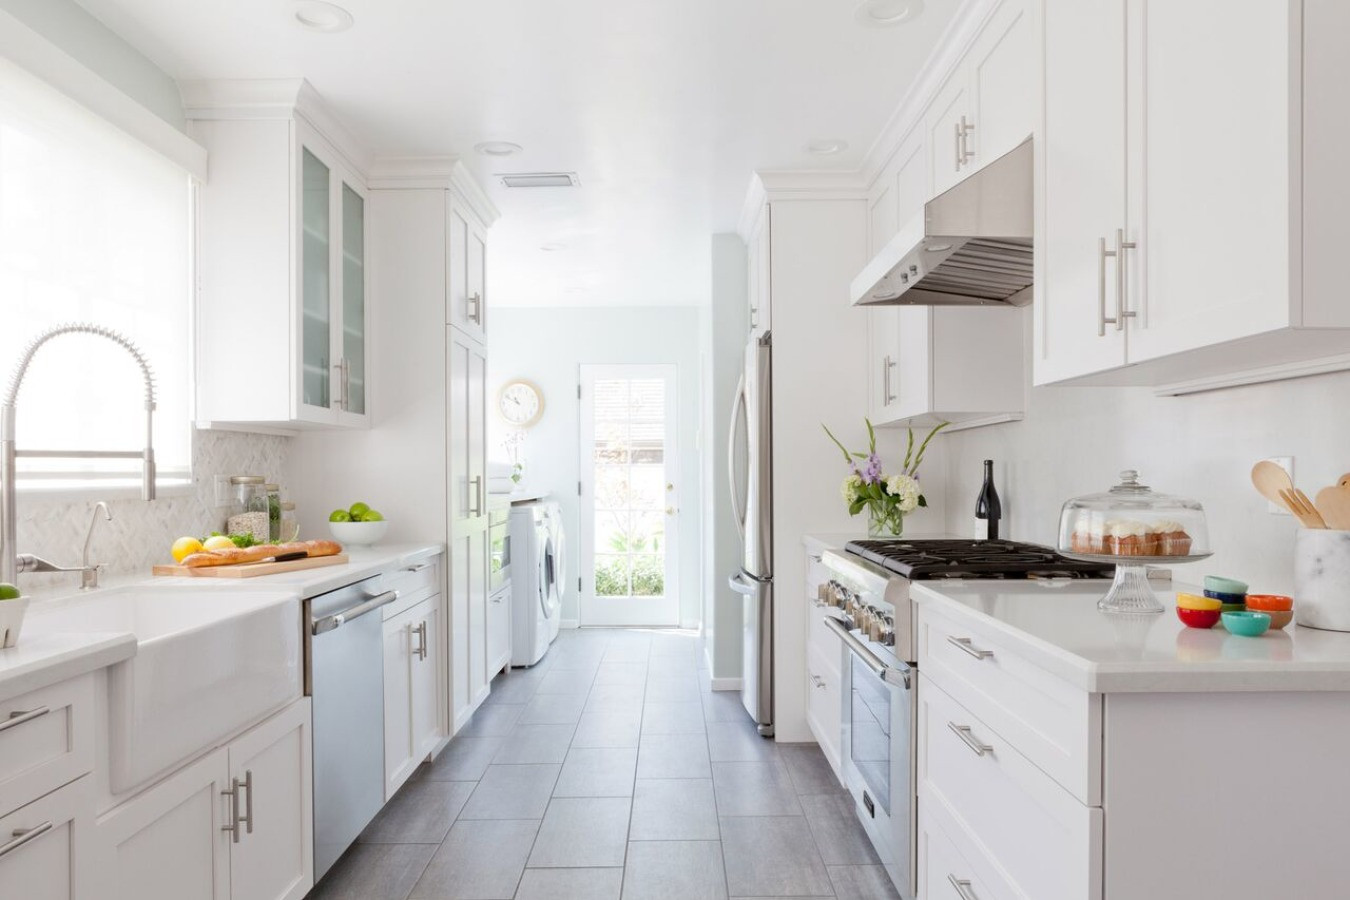 Galley Kitchen Remodels
 What You Need To Know When Designing A Galley Kitchen